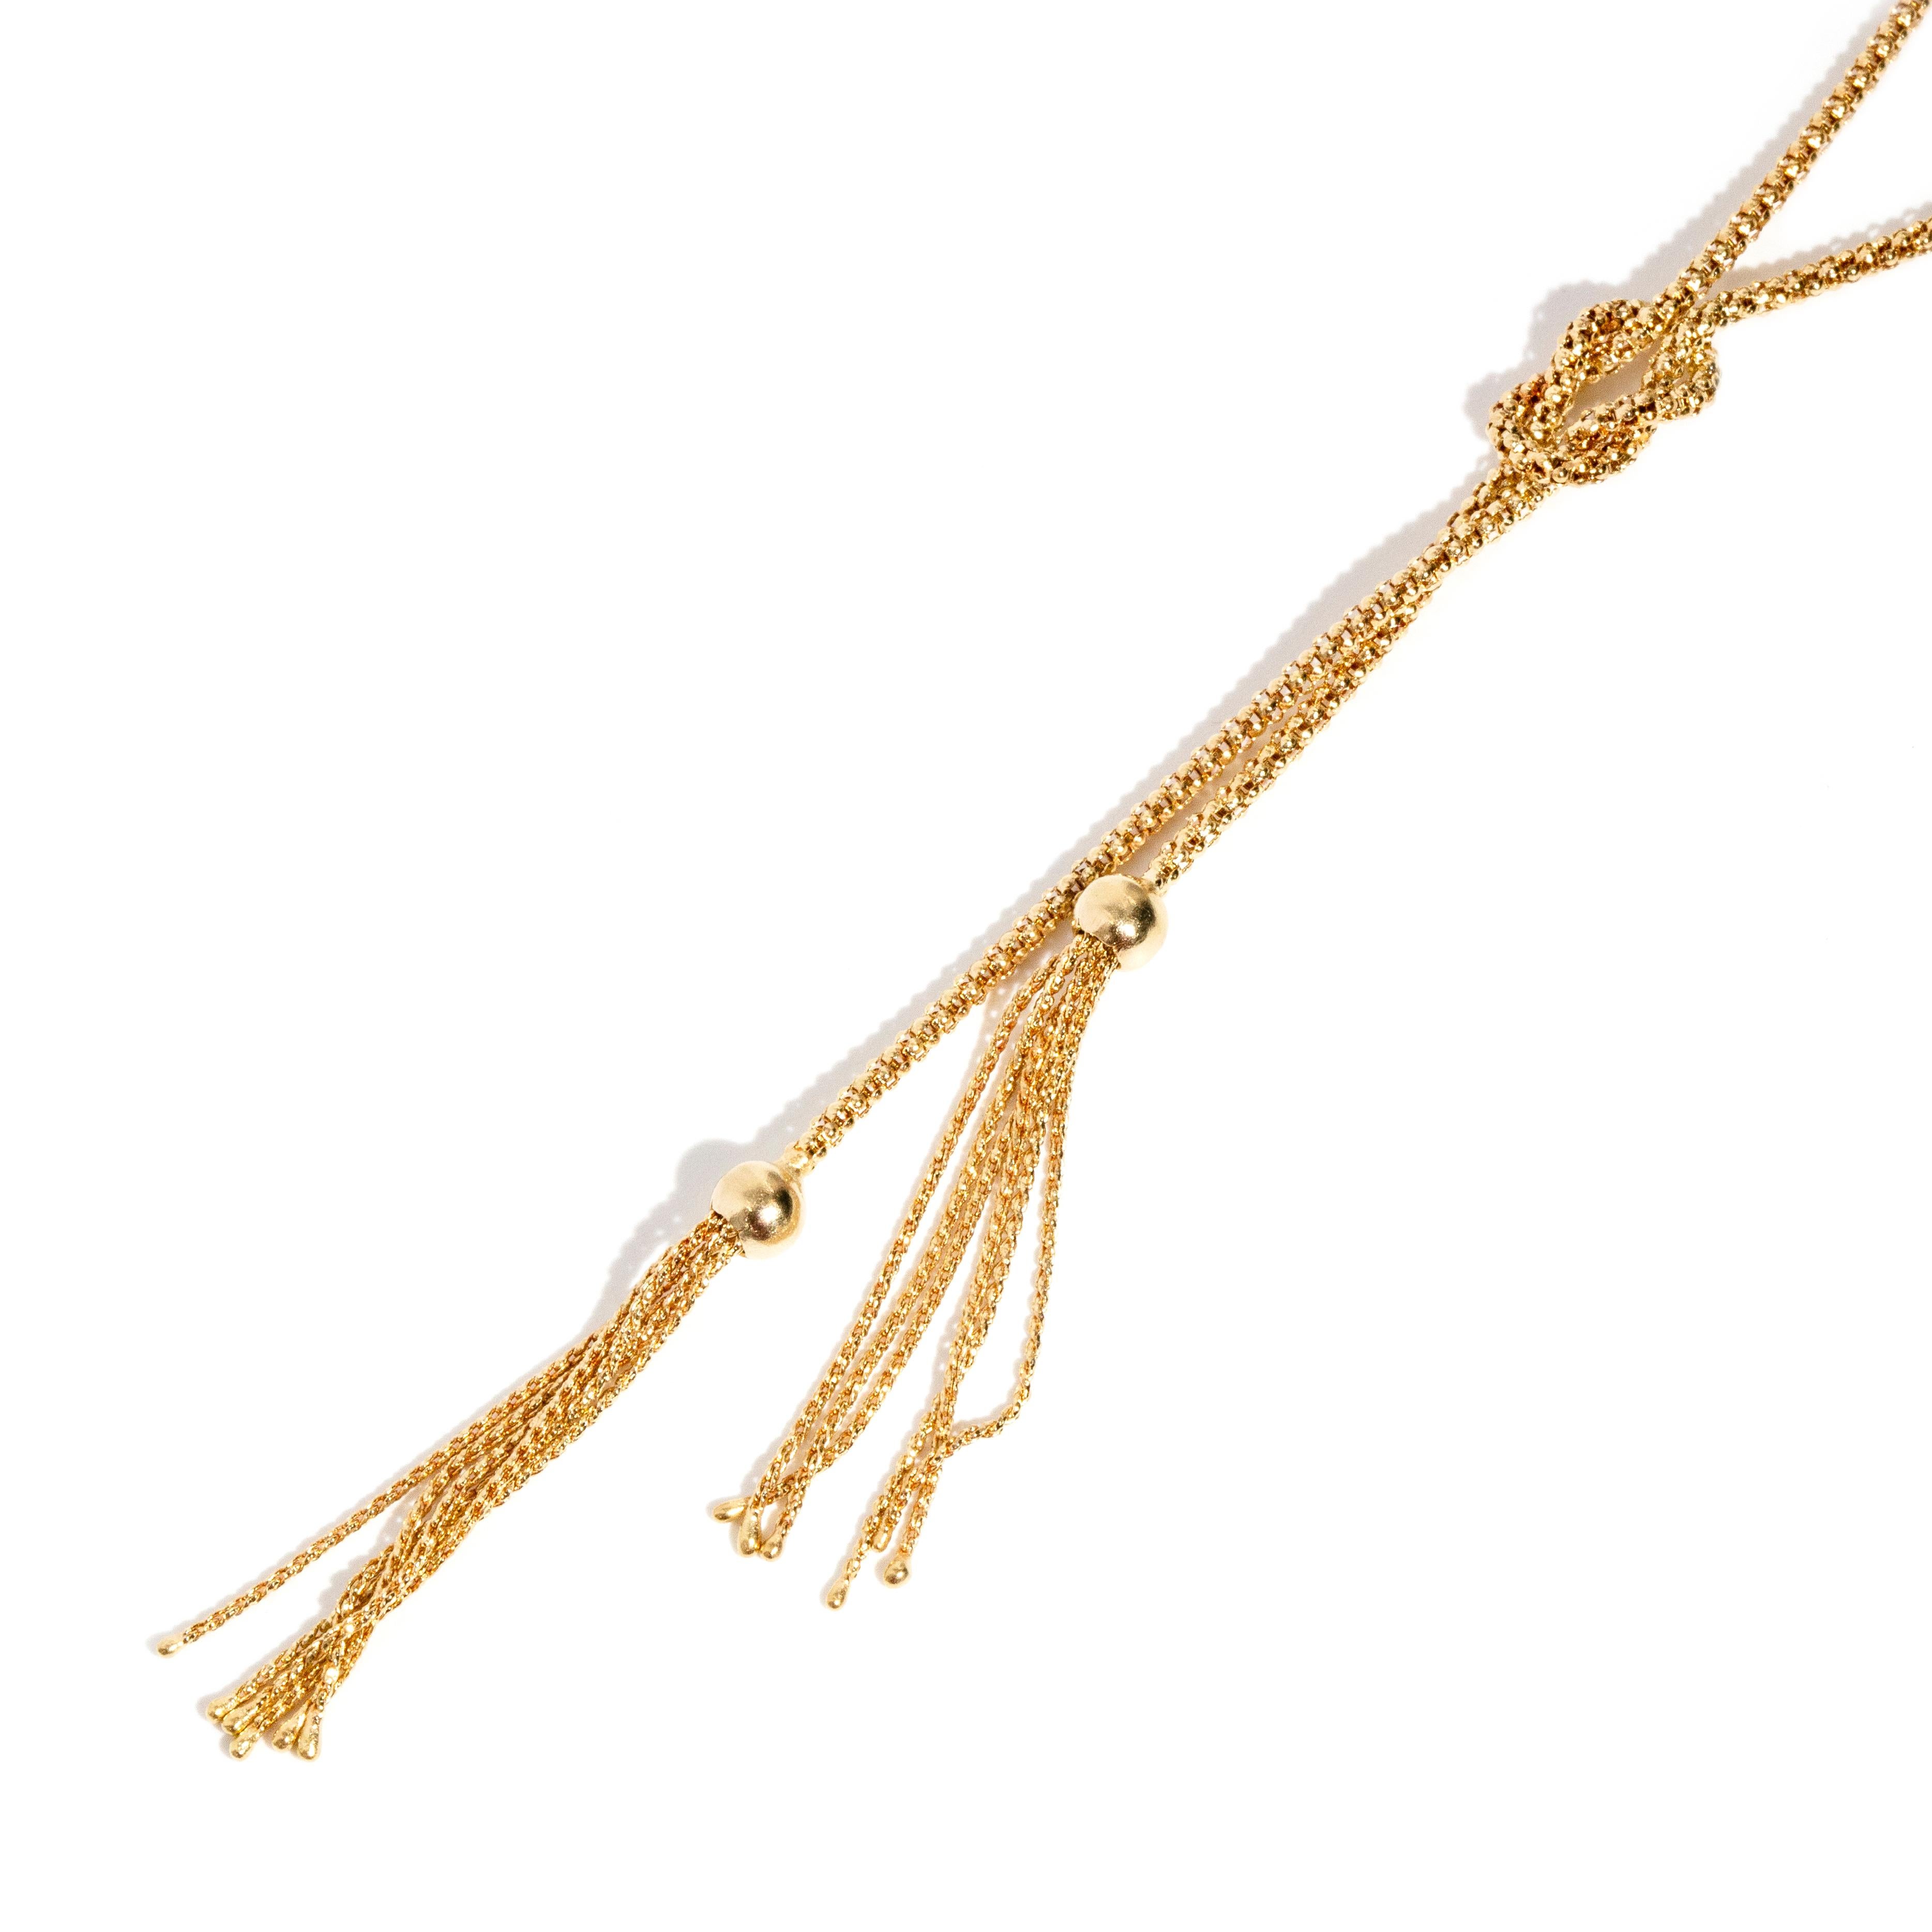 Crafted in 18 carat yellow gold, this elegant 1990s lariat necklace with lovely tassle endings brought together in a graceful knot. This wonderful piece, named The Delphine Necklace, is easily modifiable into whatever knot you prefer and looks